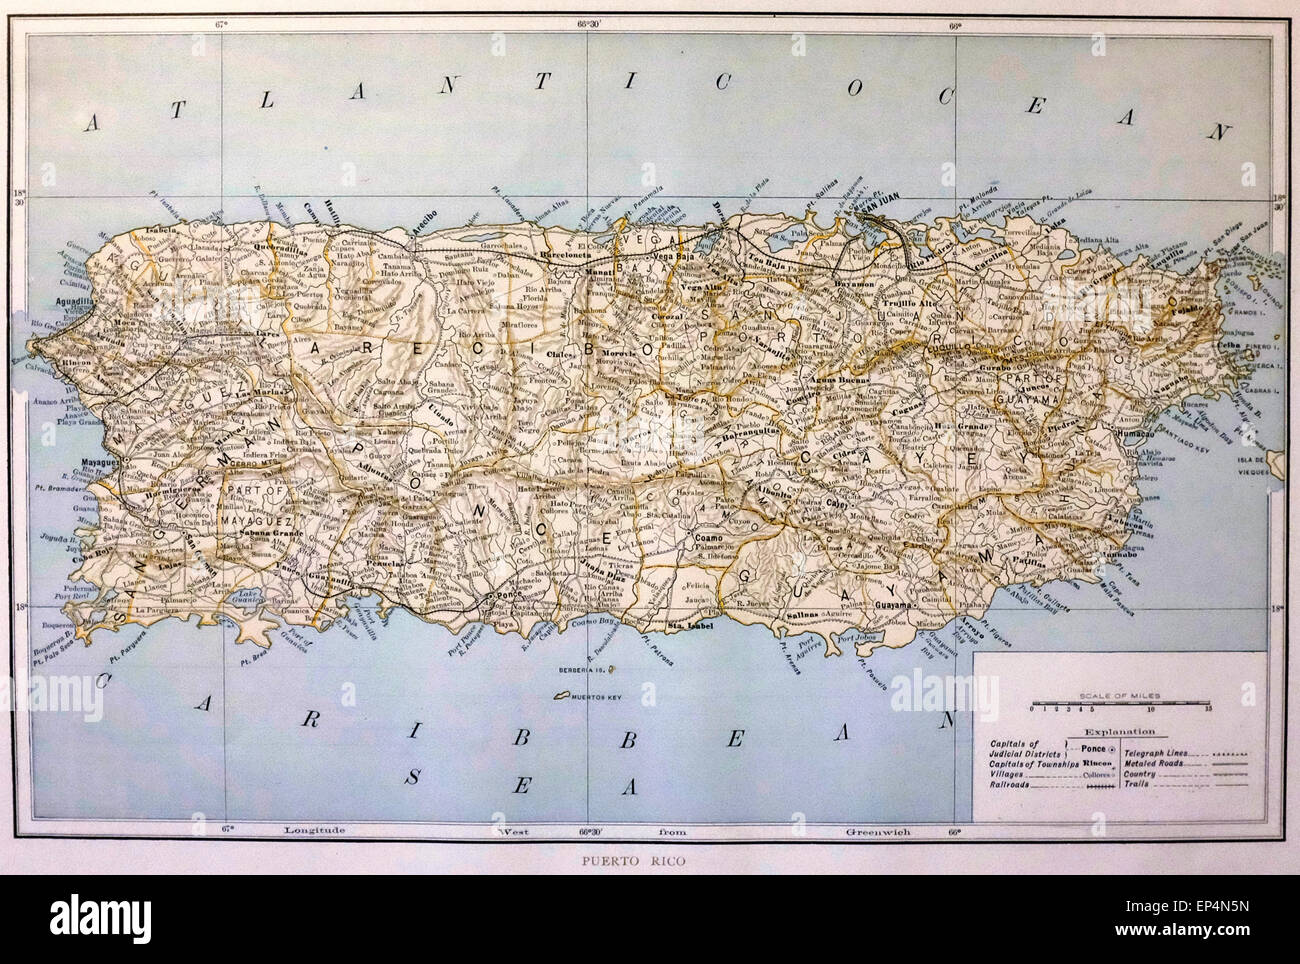 Map of Puerto Rico at the time of the Spanish American War, 1898 Stock Photo